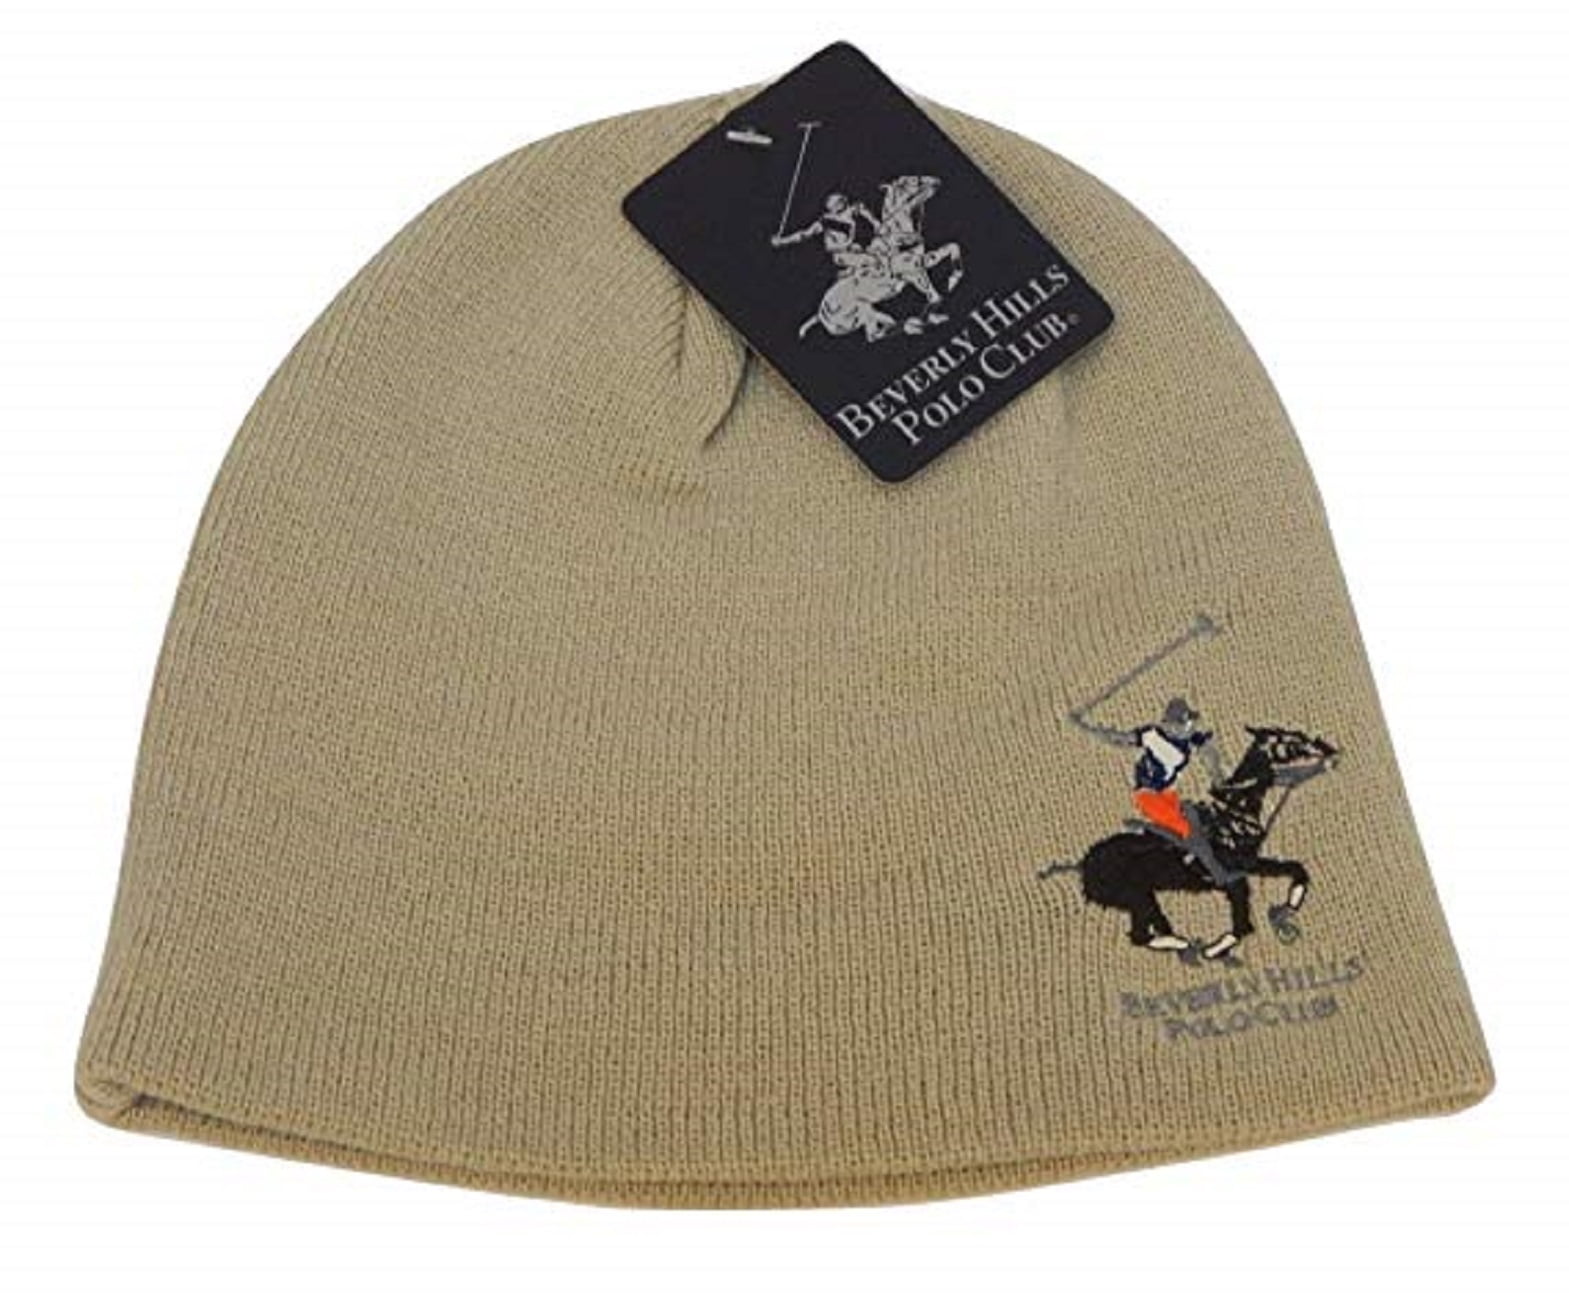 Beverly Hills Polo Club Beanie Hats, Skull Hat Knit Beanie Adult Unisex for Caps, Slouchy and Men Smooth (Uncuff Women Cap Black)